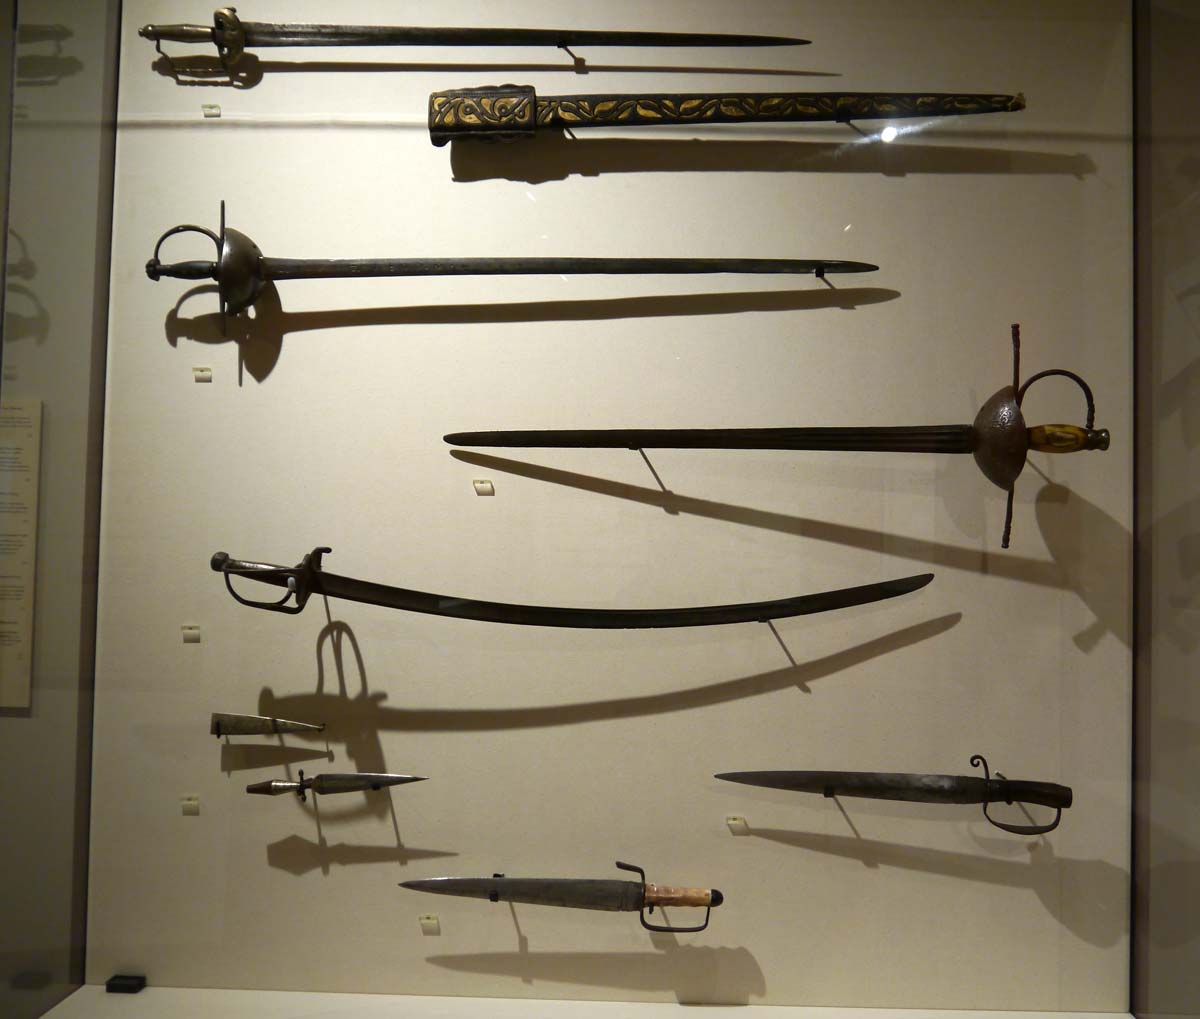 Spanish swords and knives.